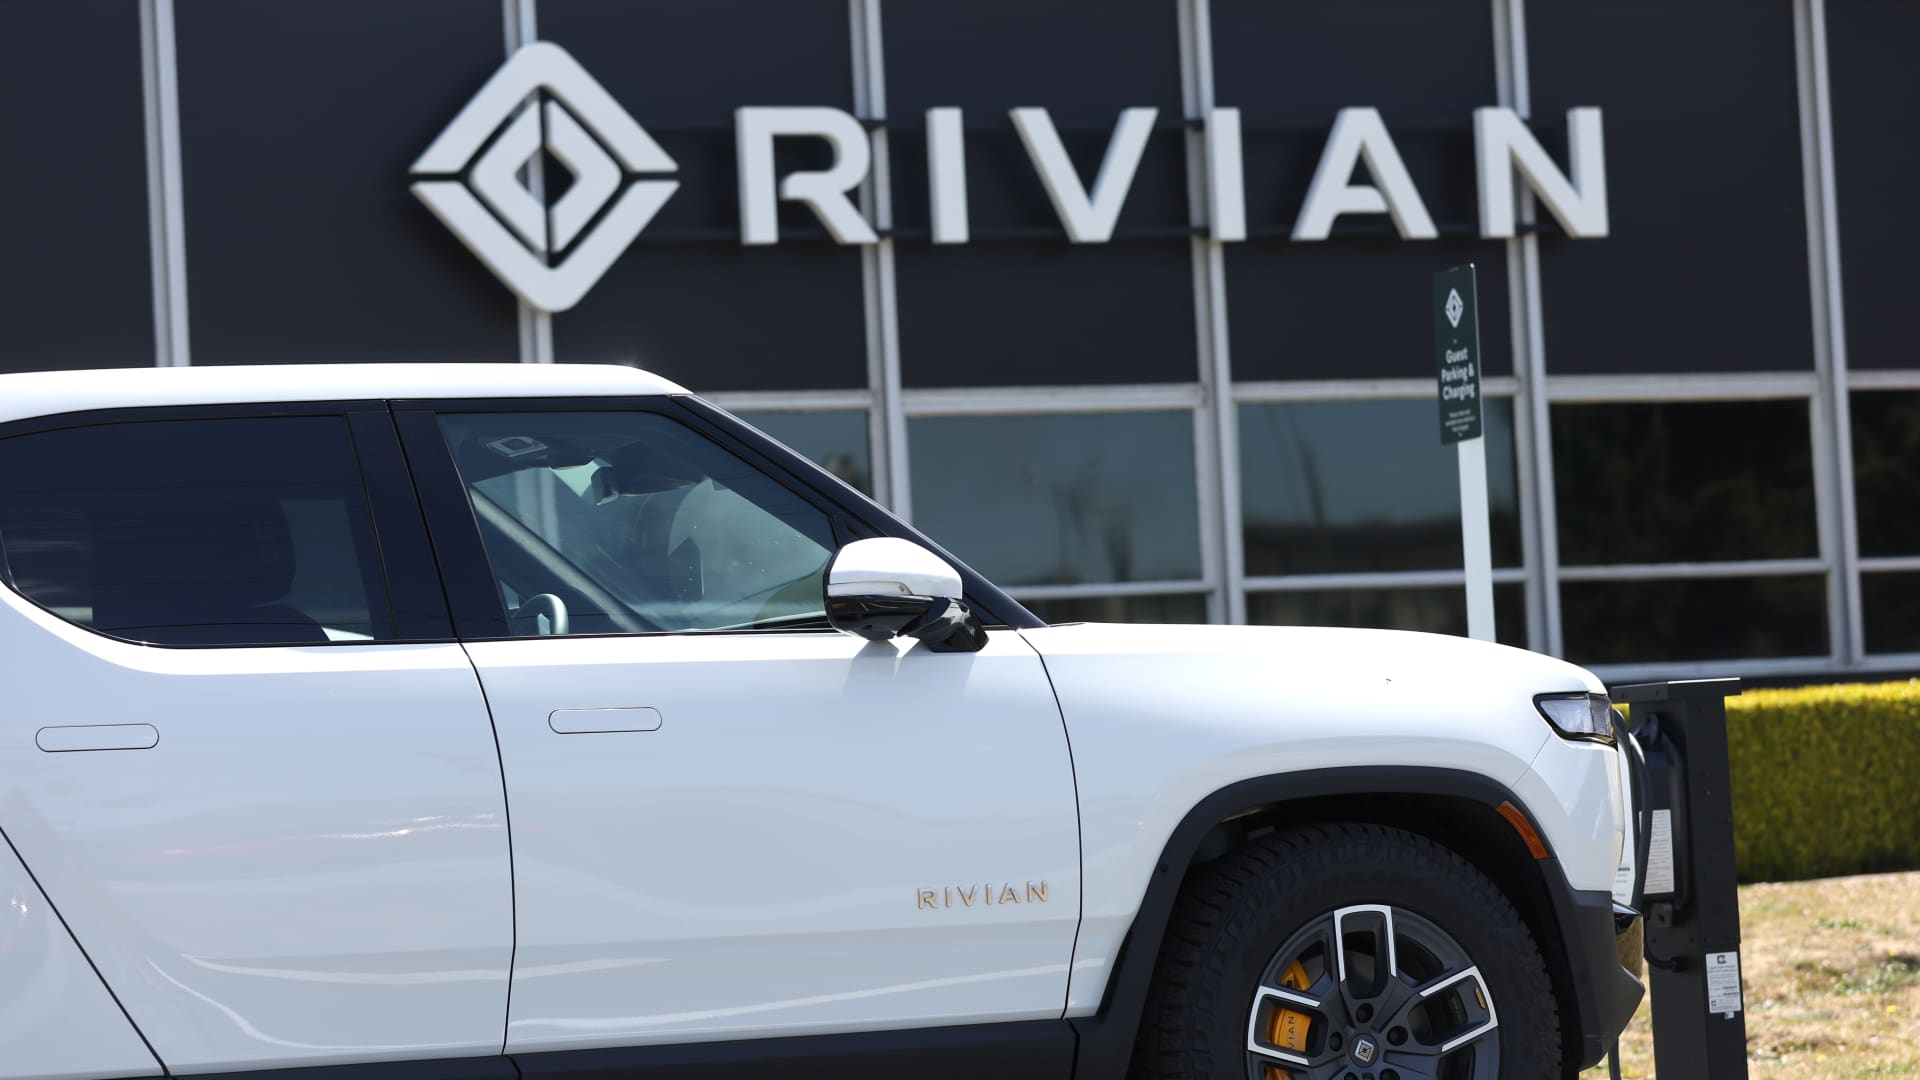 Rivian planning layoffs that could target about 5% of staff, report says